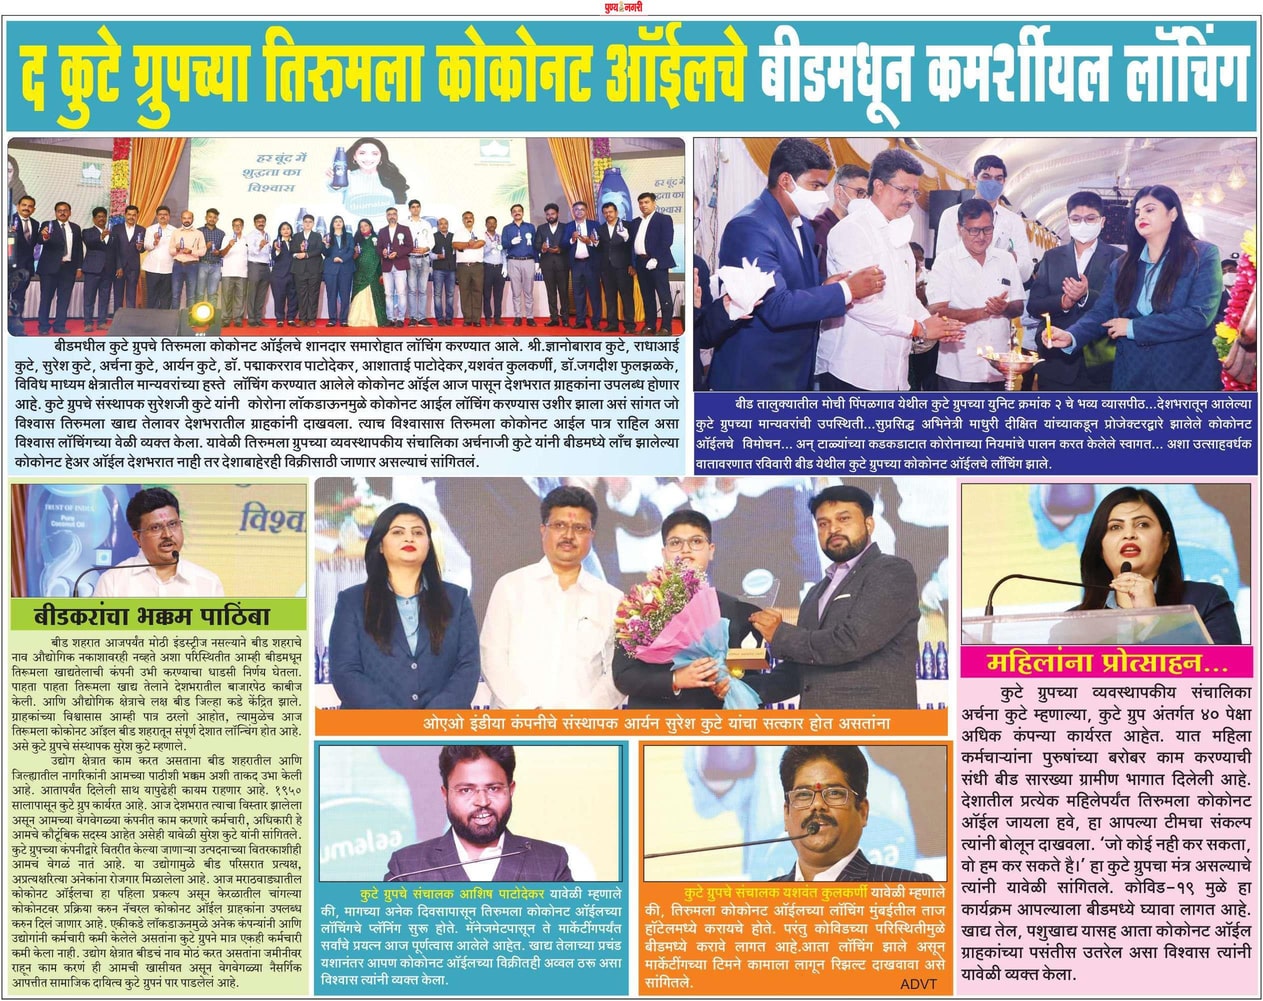 news published in daily Punya Nagari about product launching of Tirumalaa Coconut Oil By The Kute Group